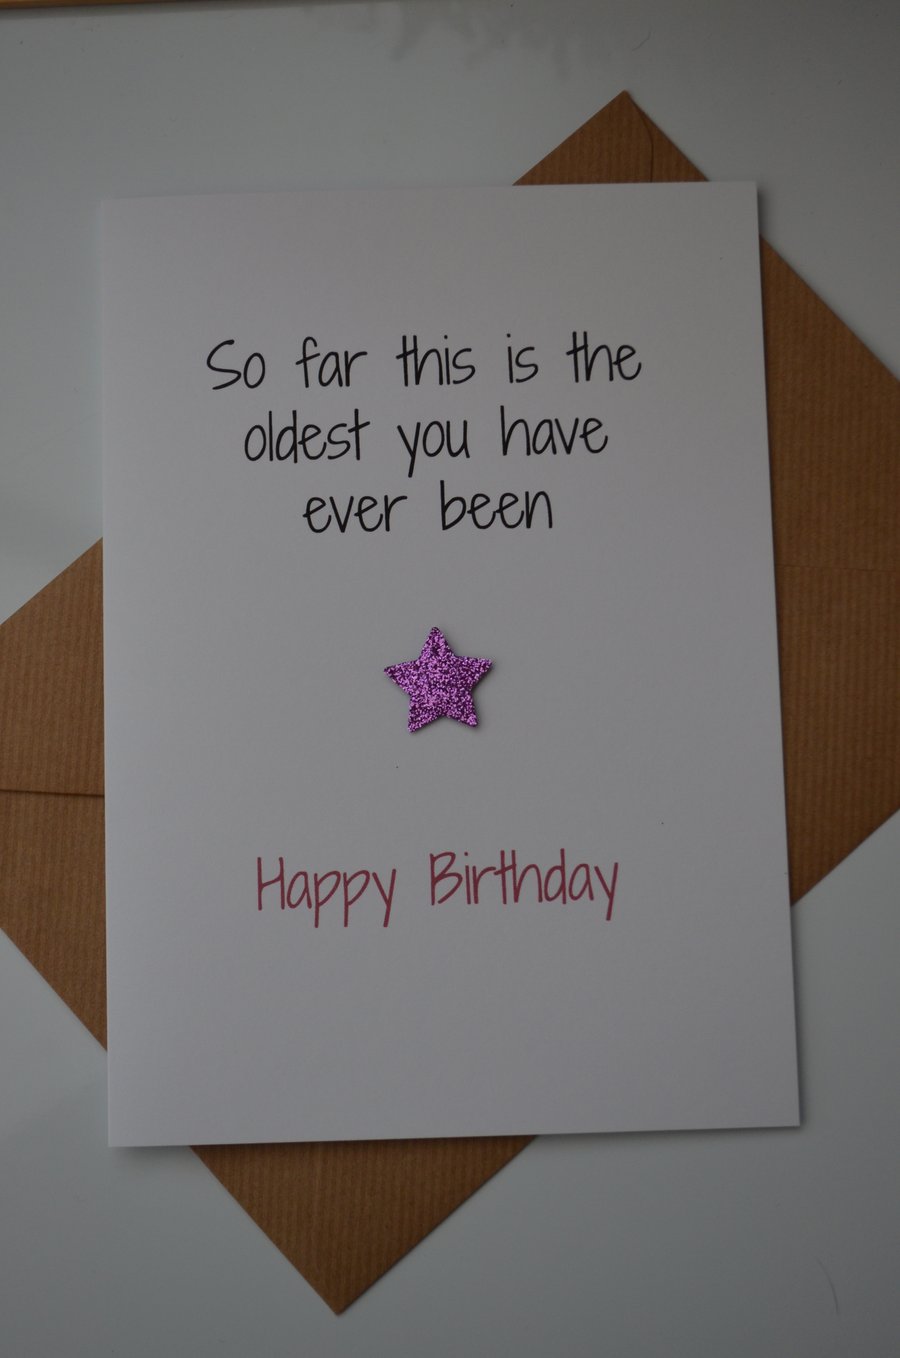 Funny Birthday Card, Cheeky, Funny, Humour - The Oldest You've Ever Been